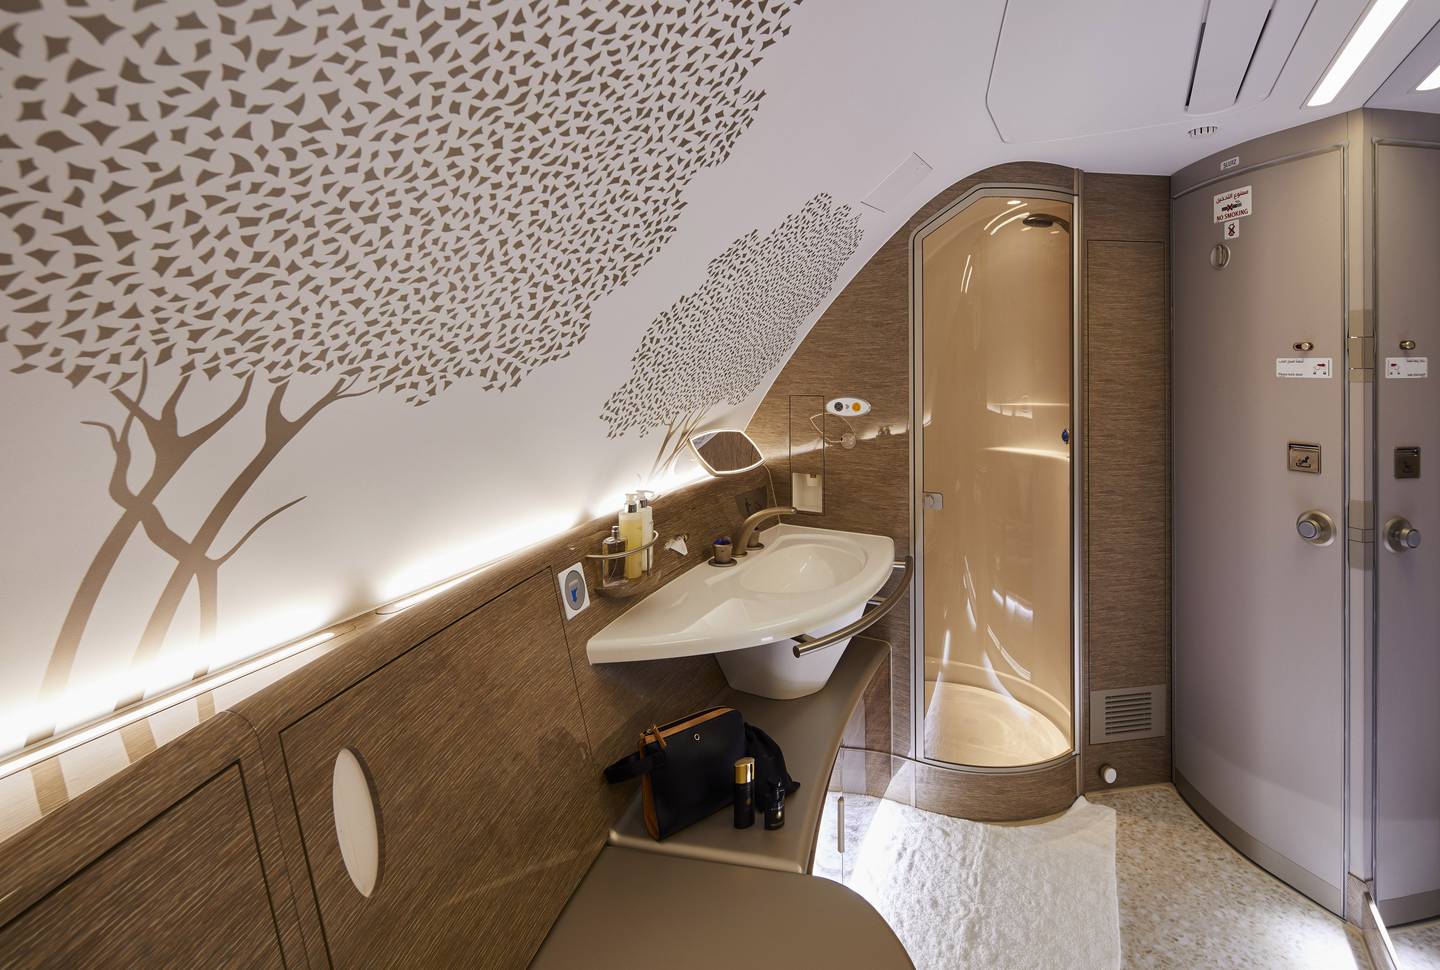 Ghaf trees, which are native to the UAE, have been hand-stenciled in the first class shower spa aboard Emirates retrofitted A380s. Photo: Emirates